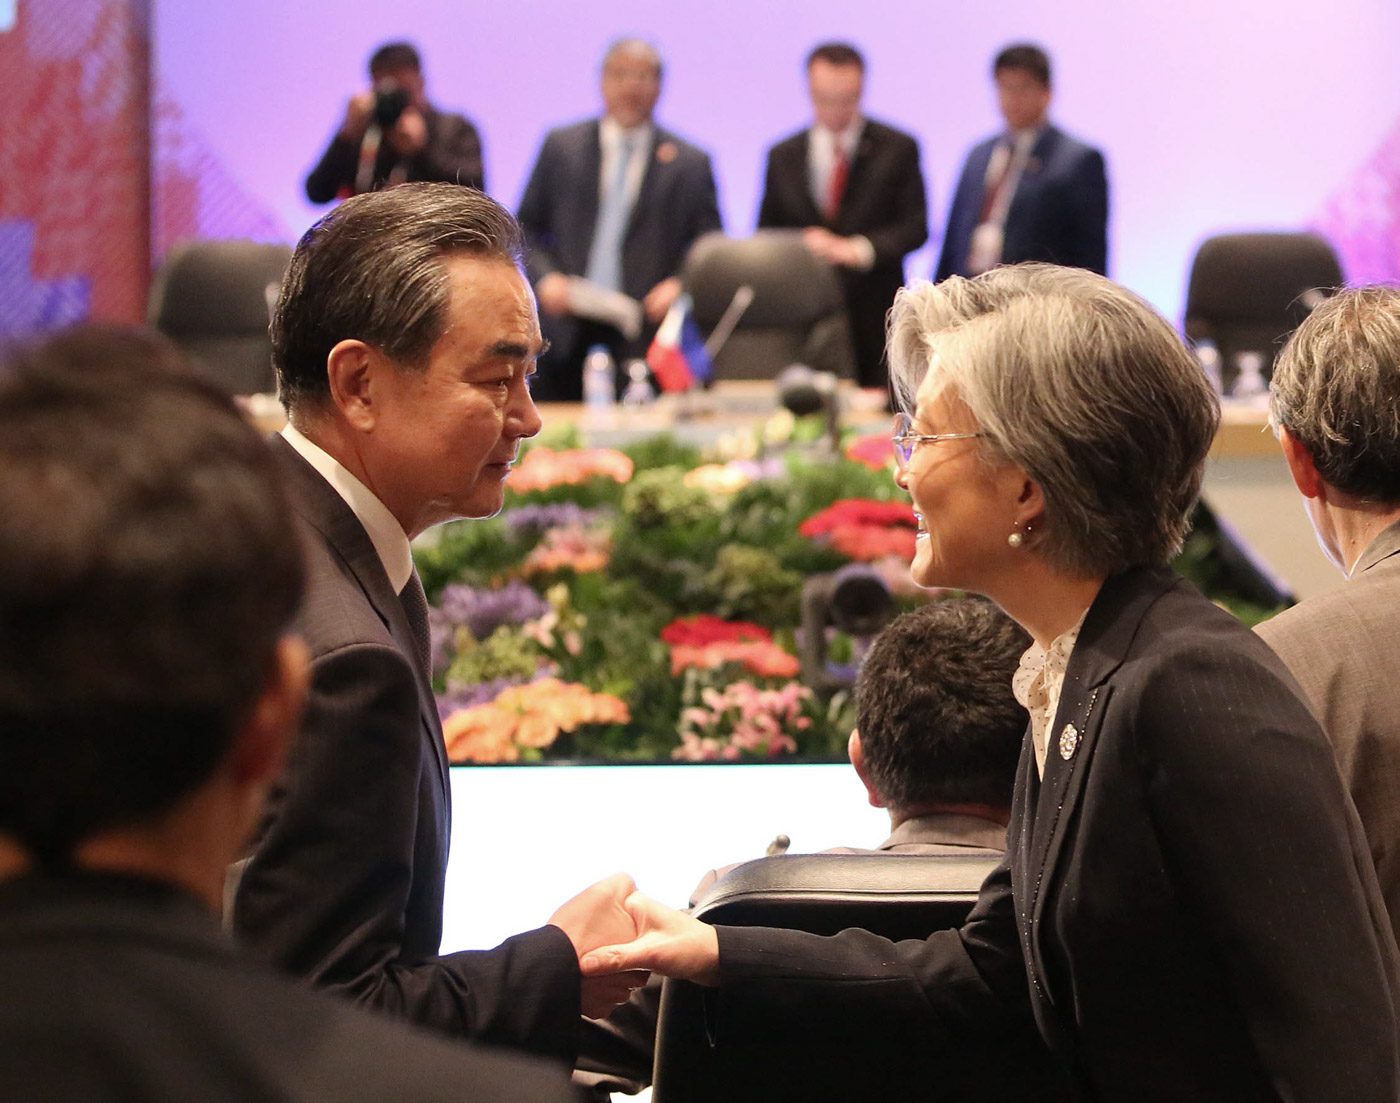 BIG NAMES. South Korean Foreign Minister Kang Kyung-wha (right) chats with Chinese Foreign Minister Wang Yi (left) during an ASEAN-related meeting in Manila. Photo by ASEAN Media Pool 